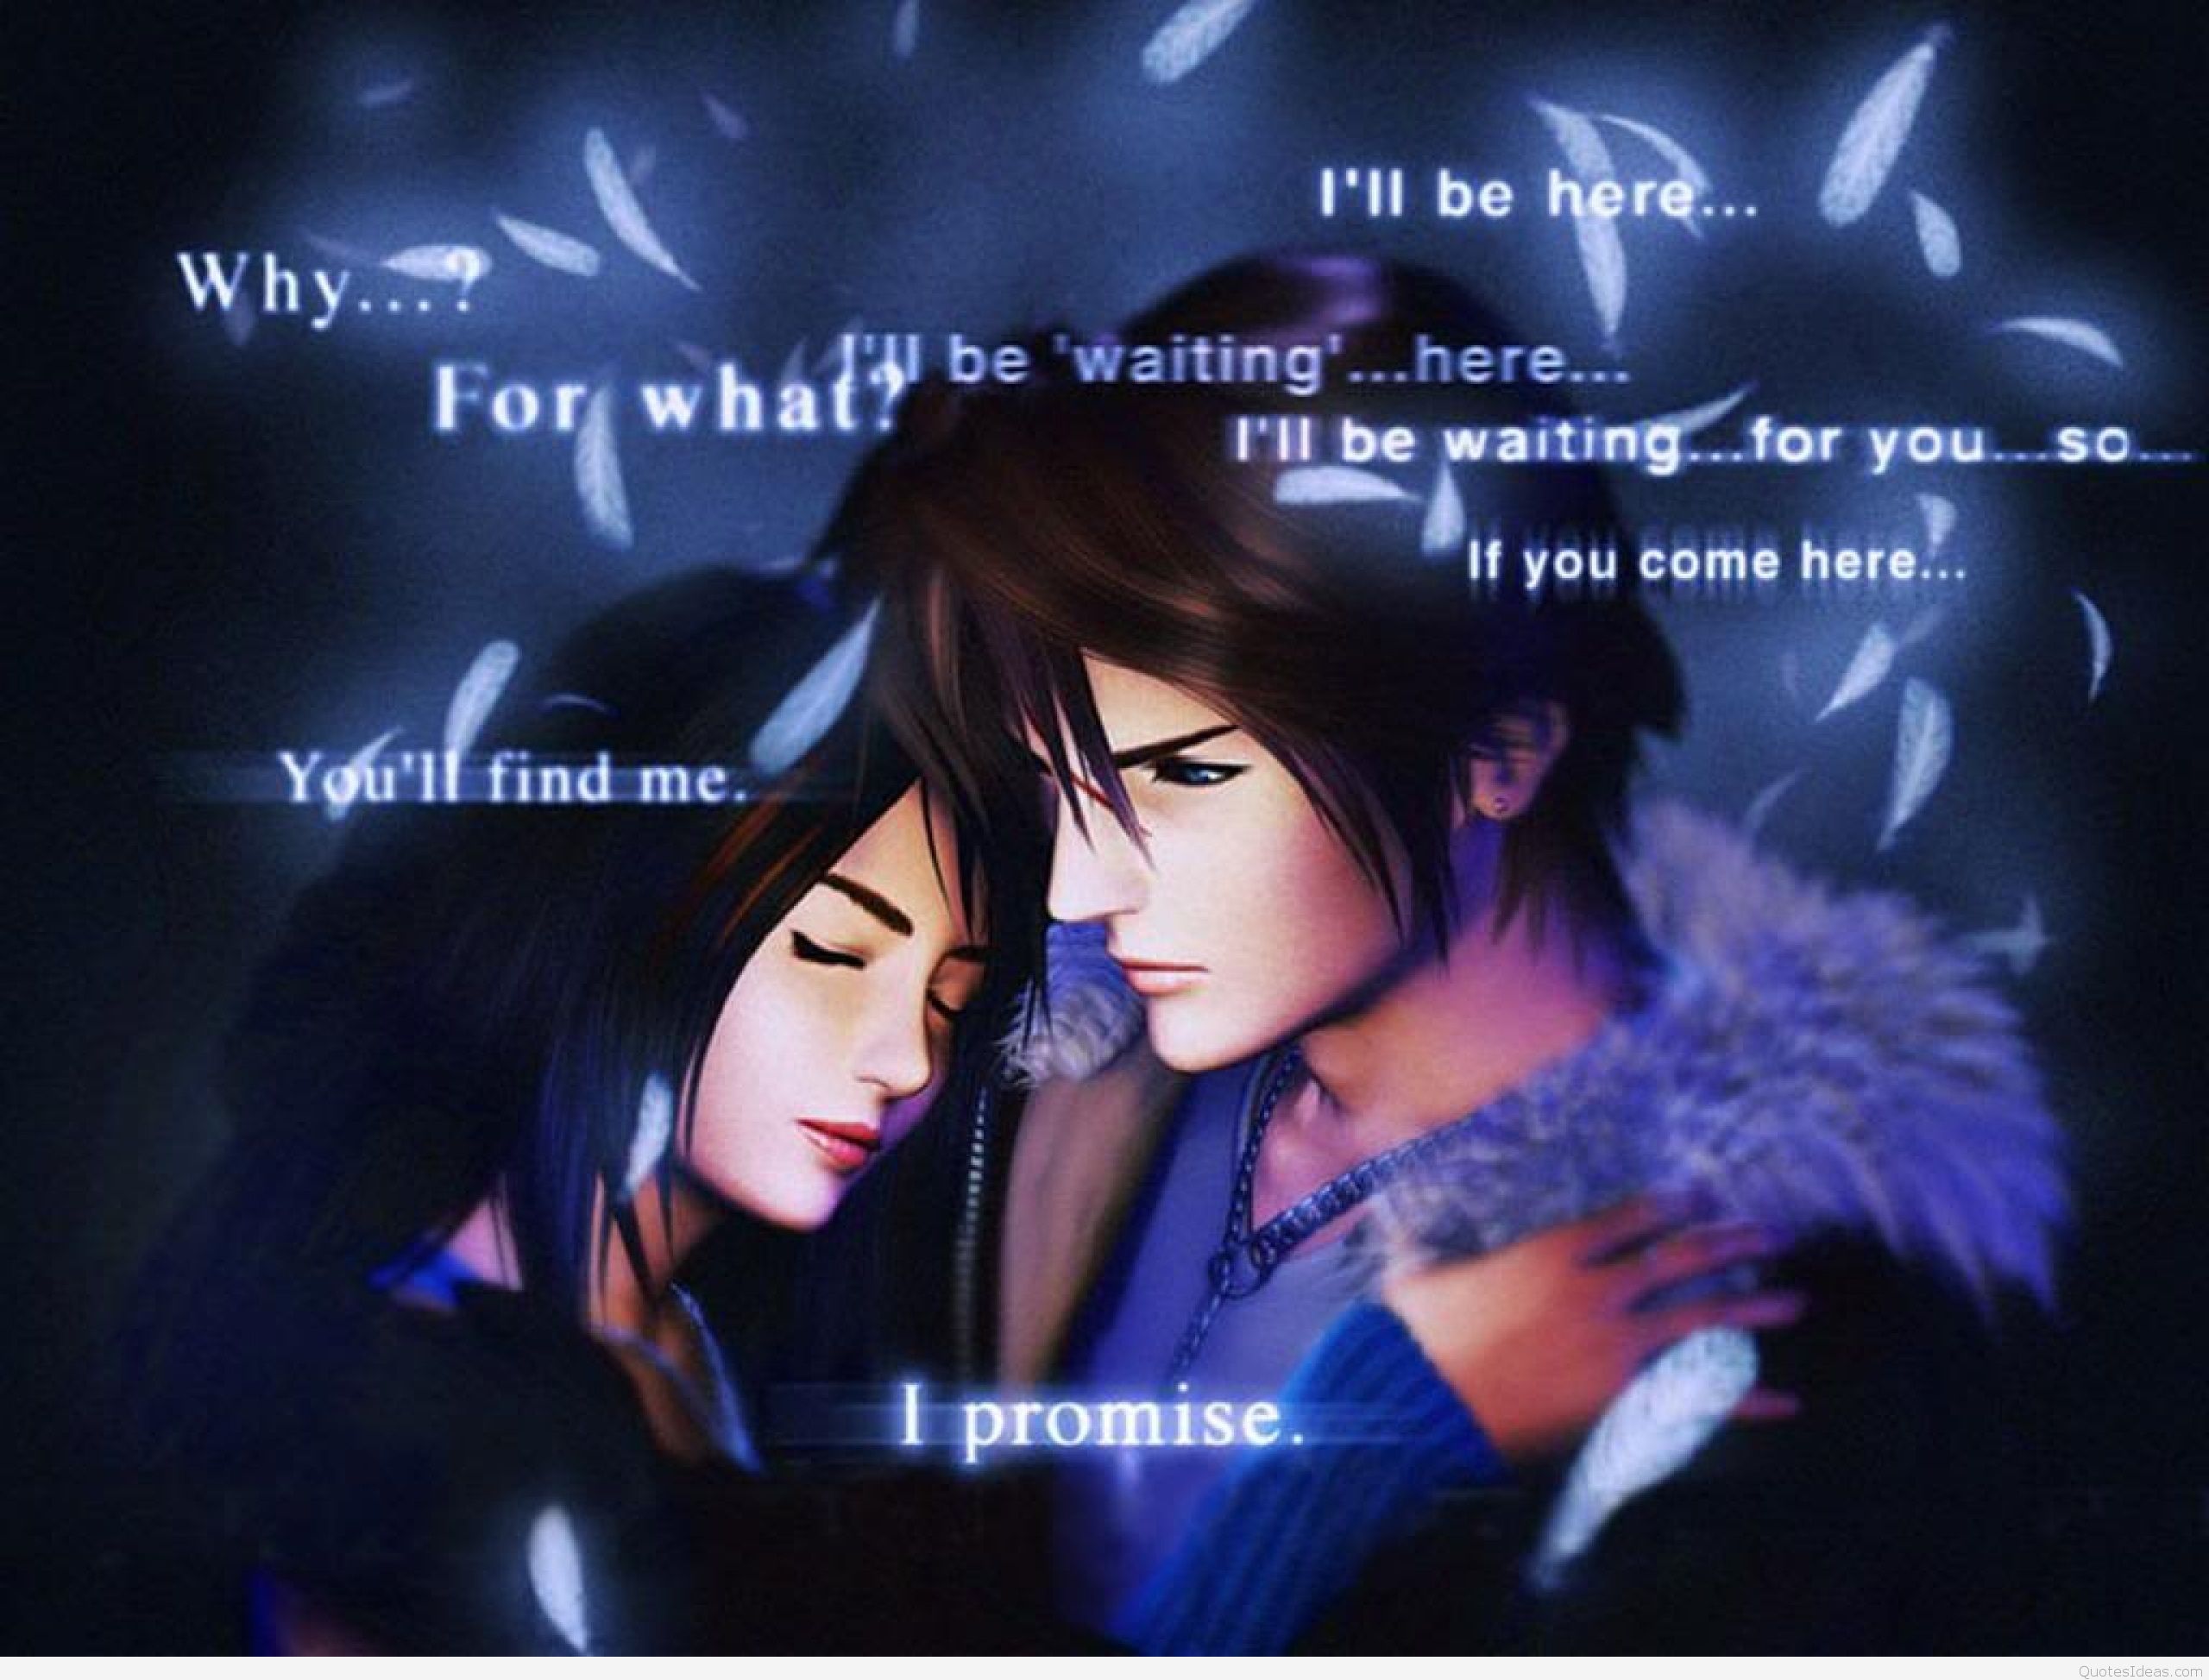 Anime Couple Images With Quotes gambar ke 13